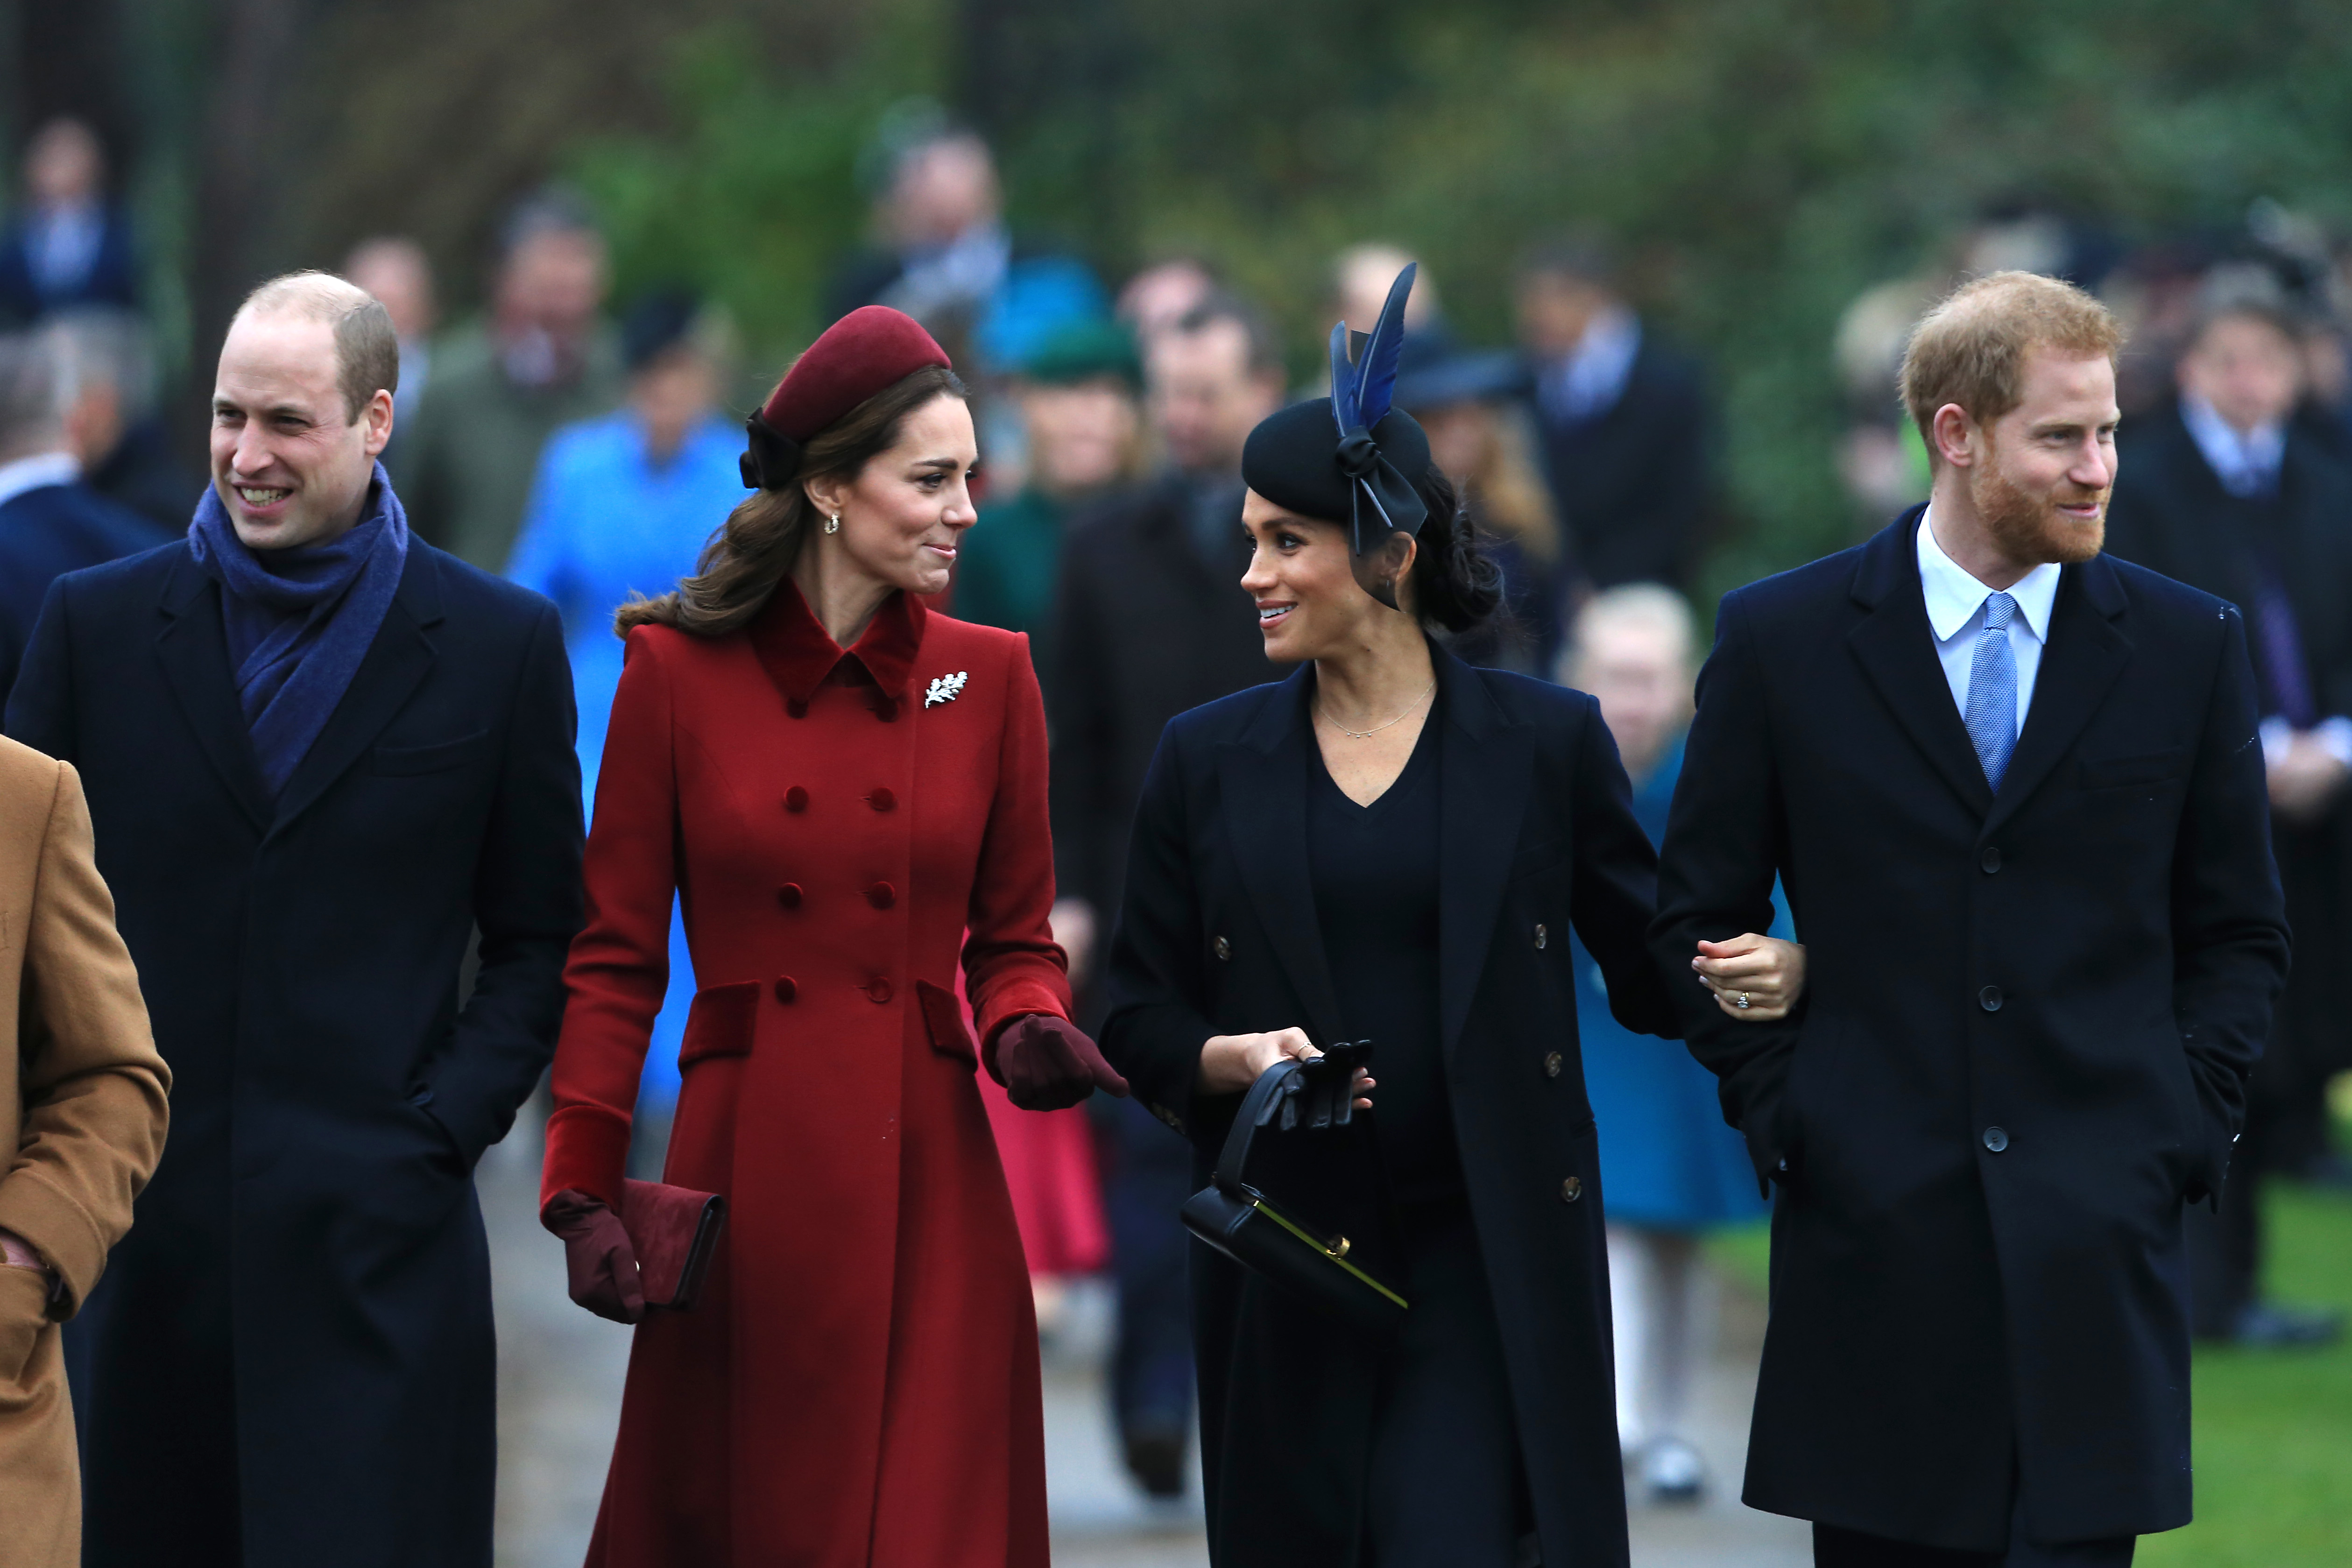 Prince William, Kate Middleton, Meghan Markle, Prince Harry (Image: Getty Images)